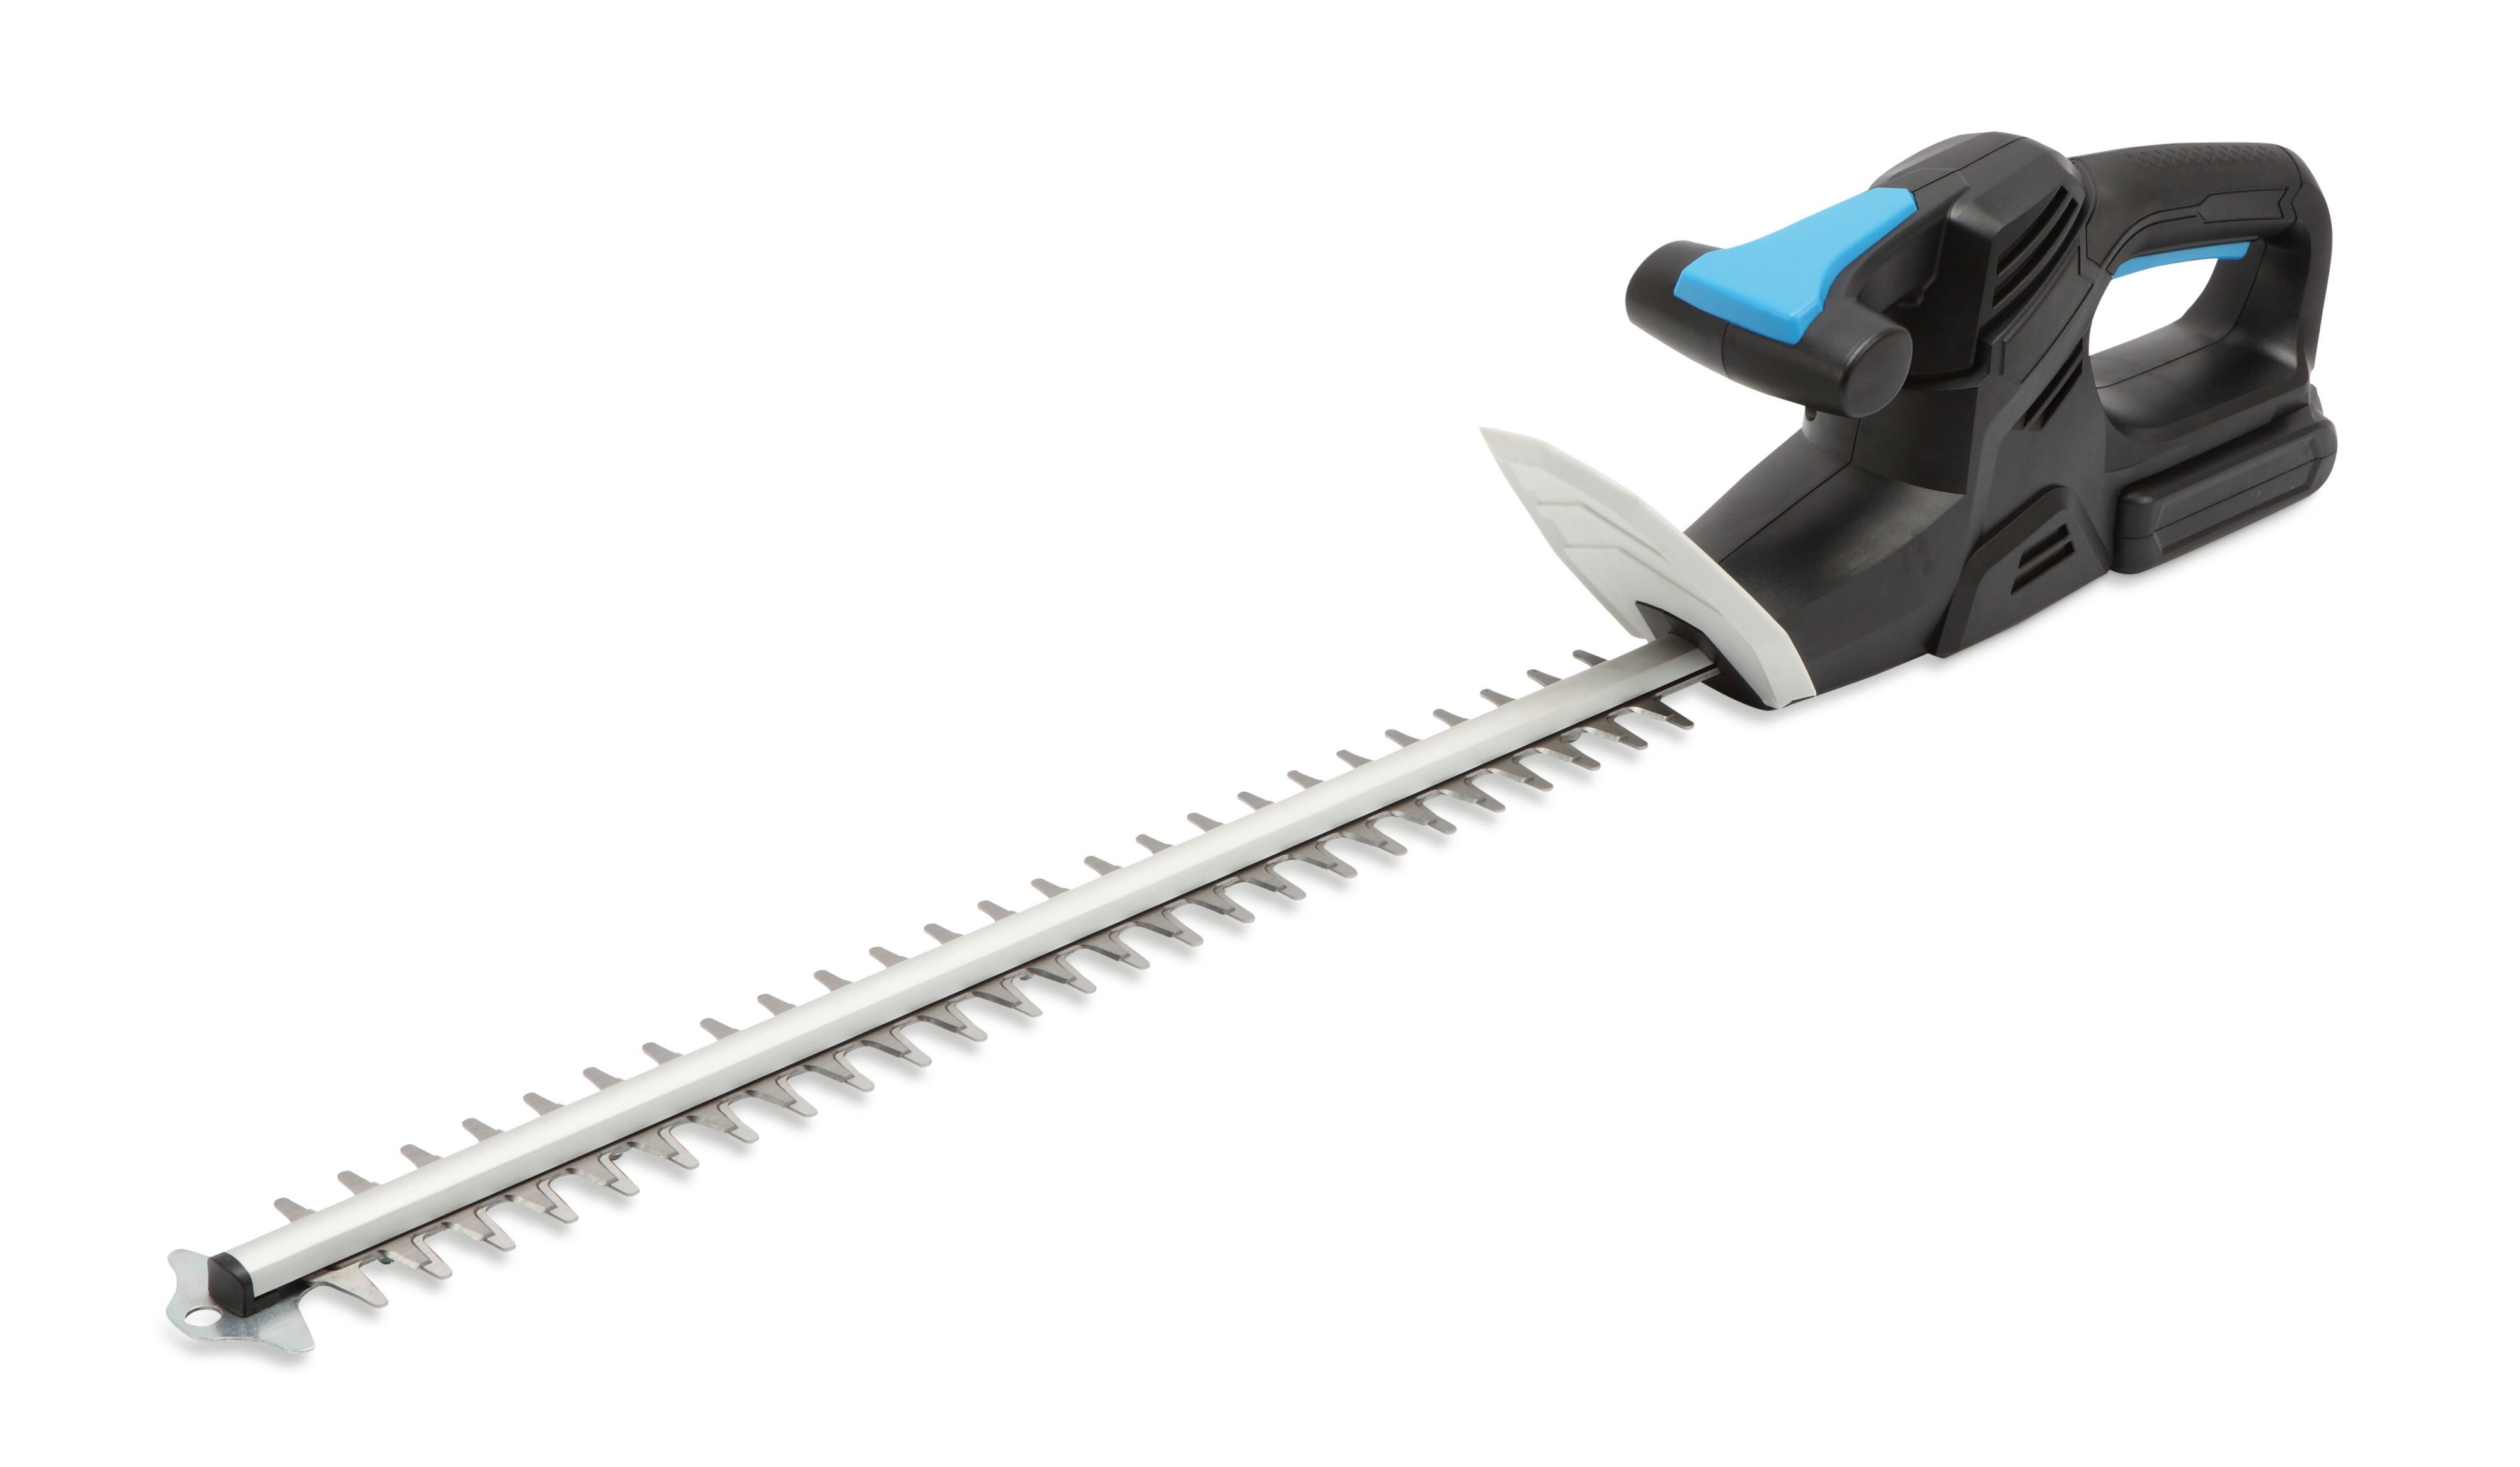 macallister cordless hedge trimmer